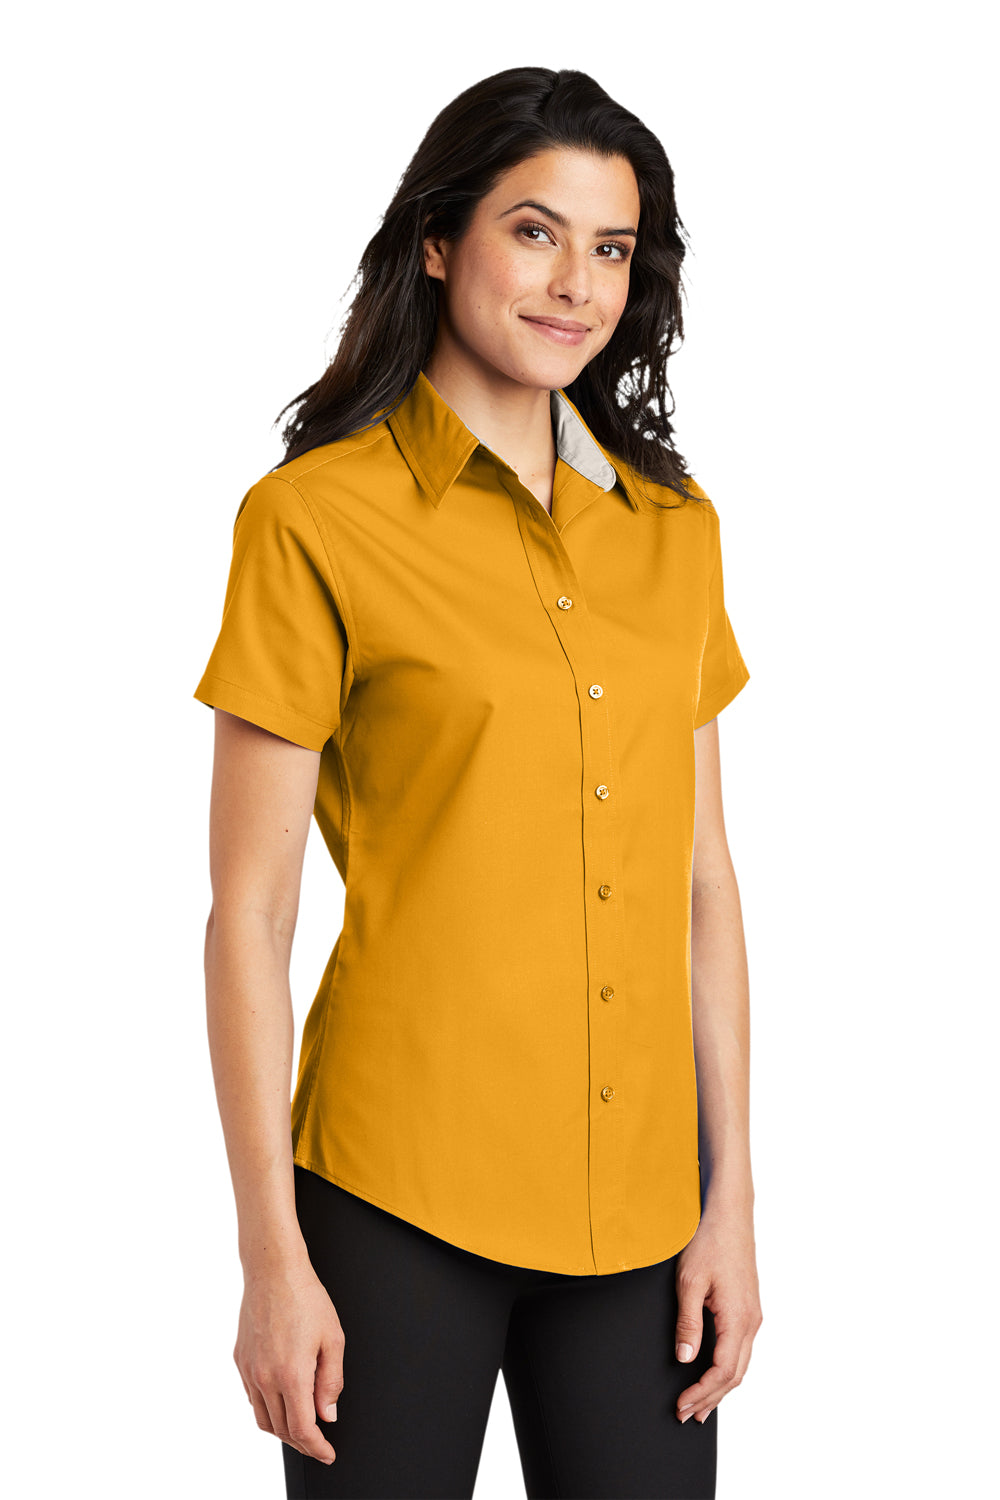 Port Authority L508 Womens Easy Care Wrinkle Resistant Short Sleeve Button Down Shirt Athletic Gold 3Q